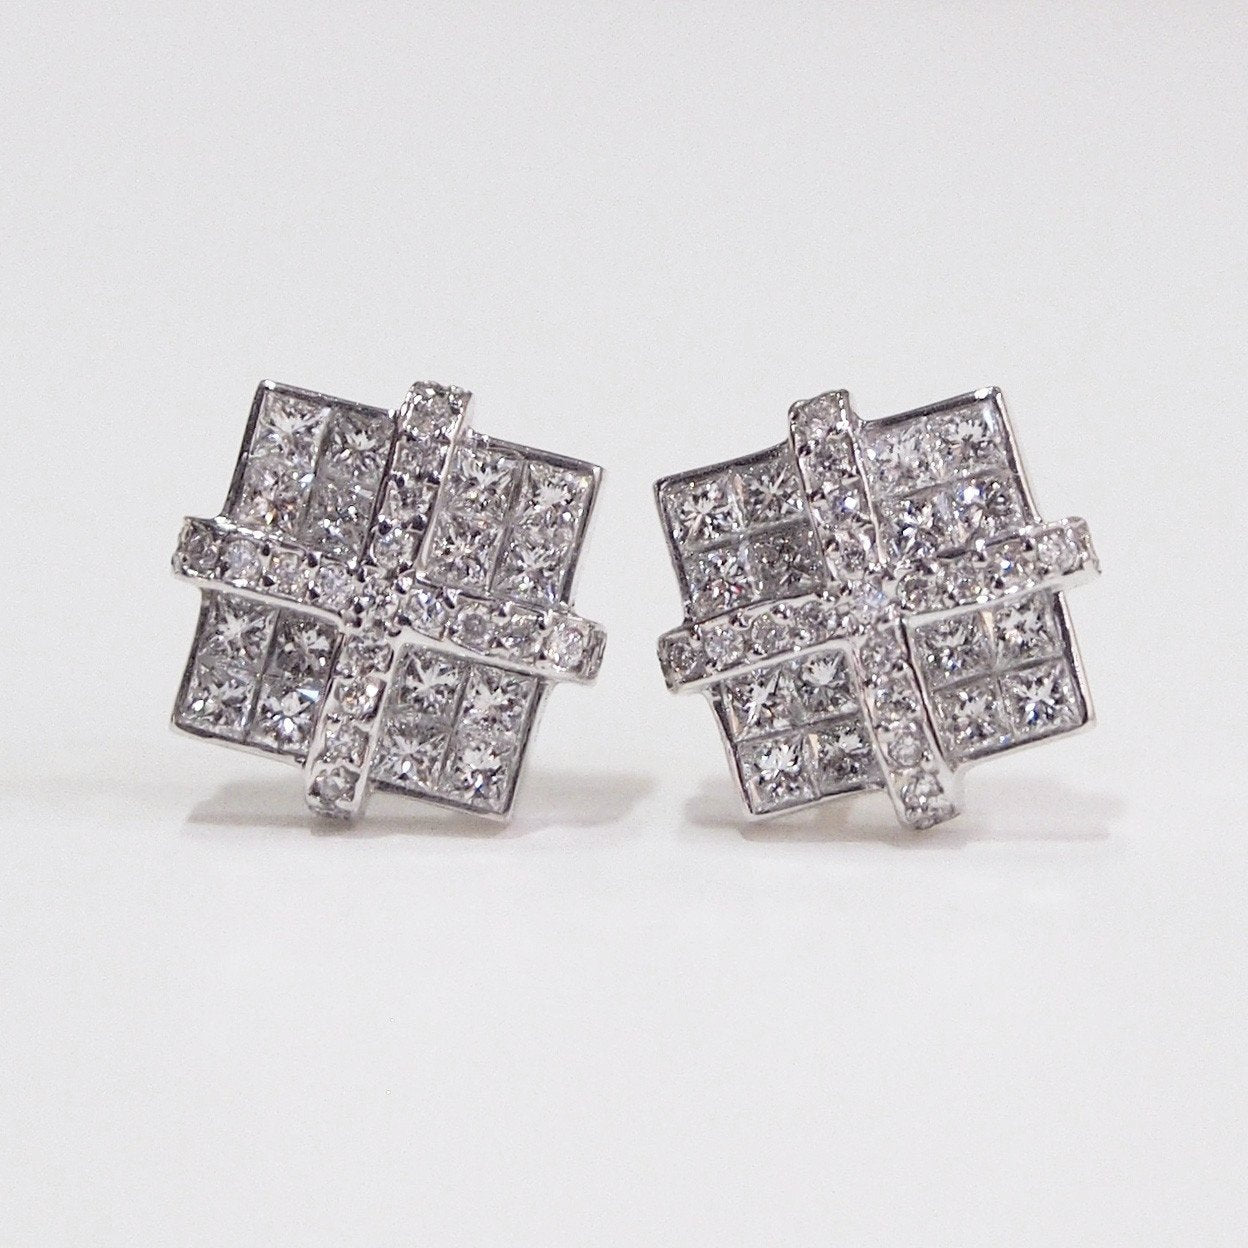 18K White Gold Invisible And Pave Set Diamond Earrings